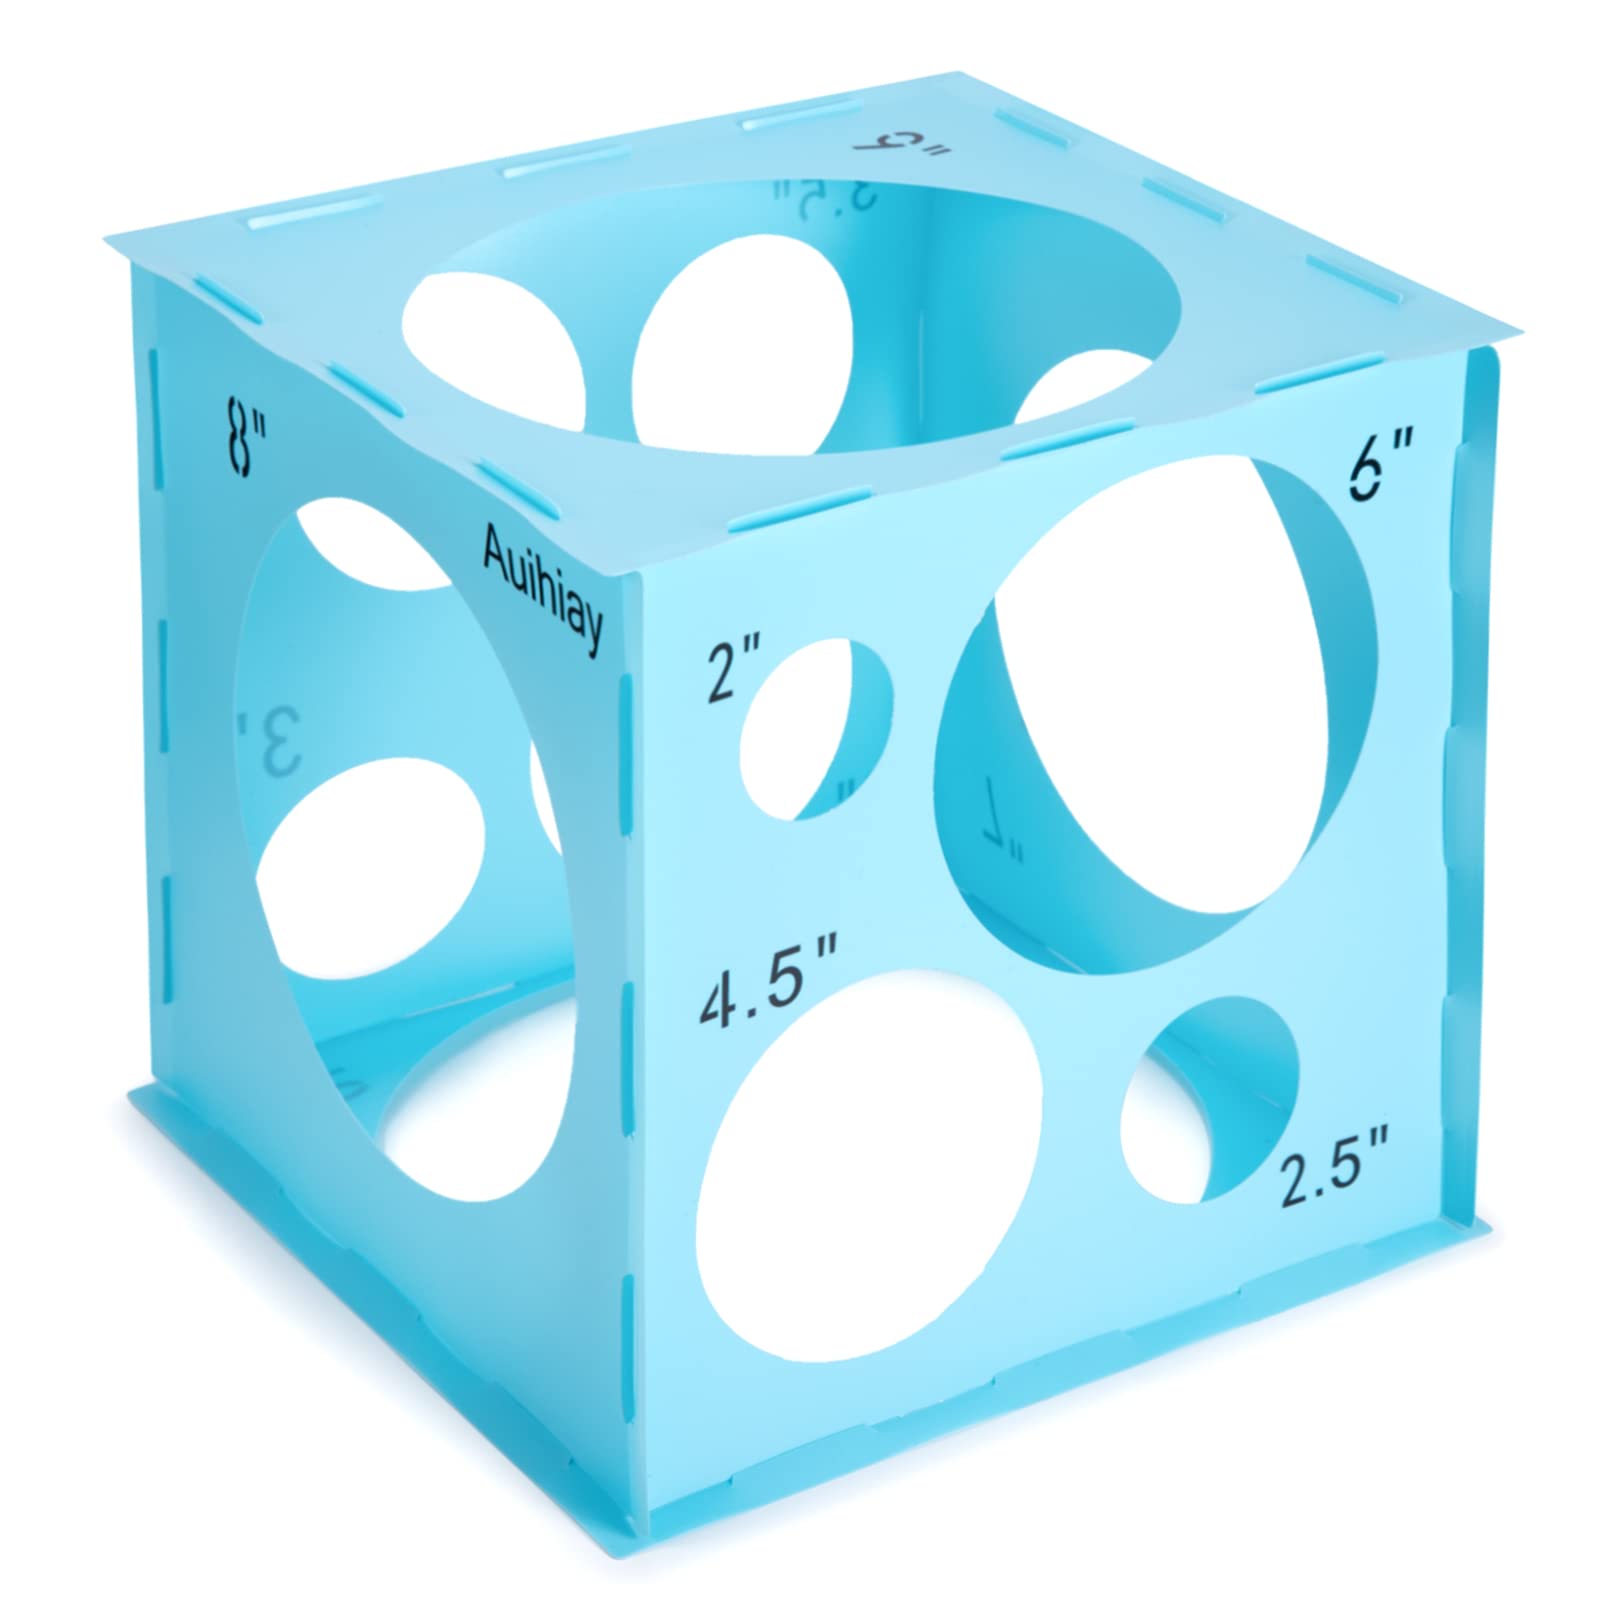 Auihiay 14 Holes Balloon Sizer Cube, Balloon Measurement Tool with  Instructions, Balloon Sizr Tool for Balloon Arches, Balloon Column, Balloon  Party